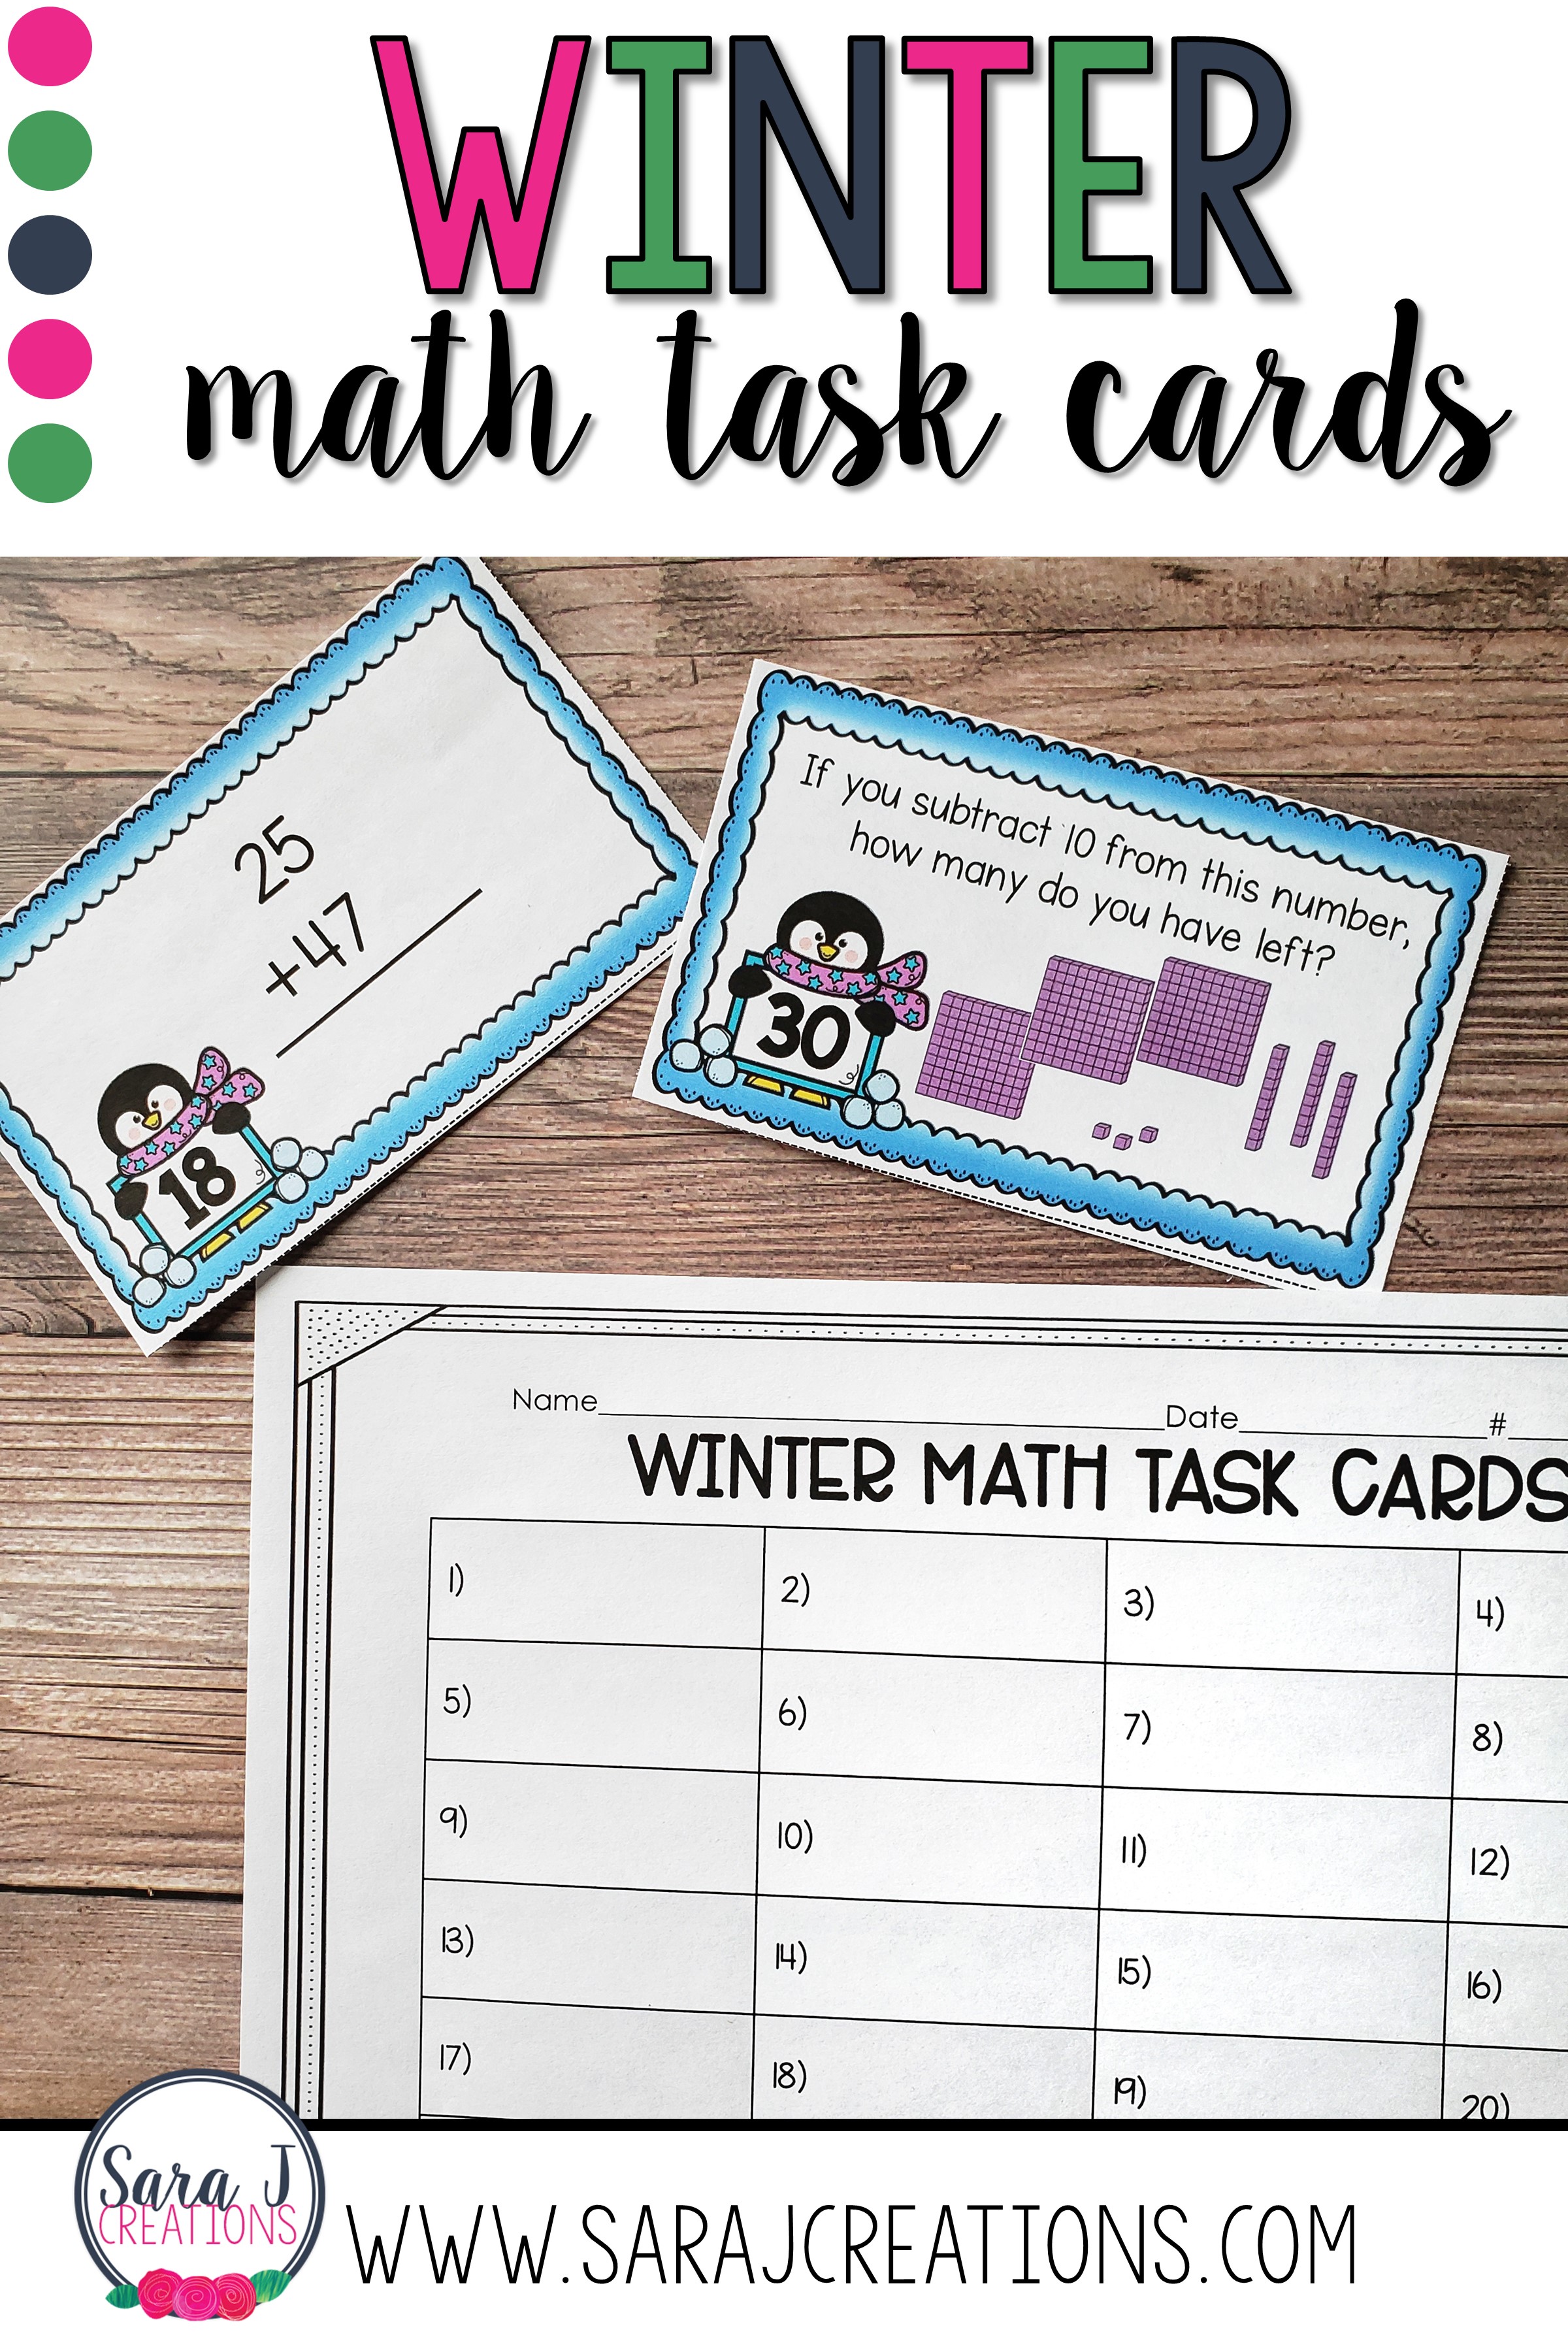 Review place value, time, money and so many more concepts with these winter math task cards. Perfect for second grade.